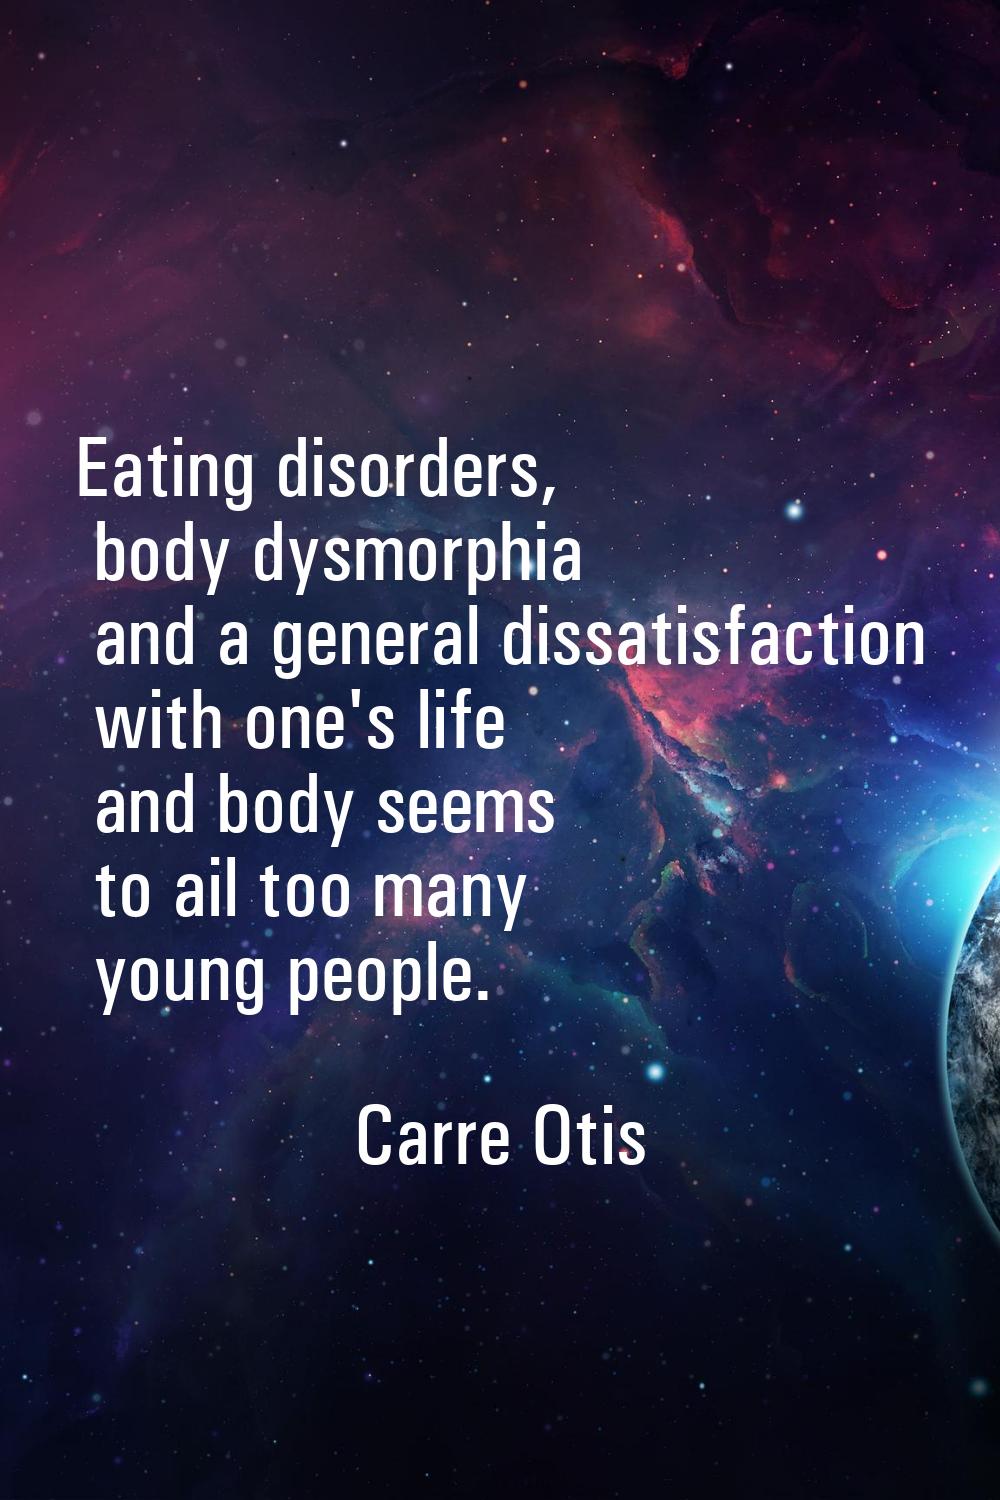 Eating disorders, body dysmorphia and a general dissatisfaction with one's life and body seems to a